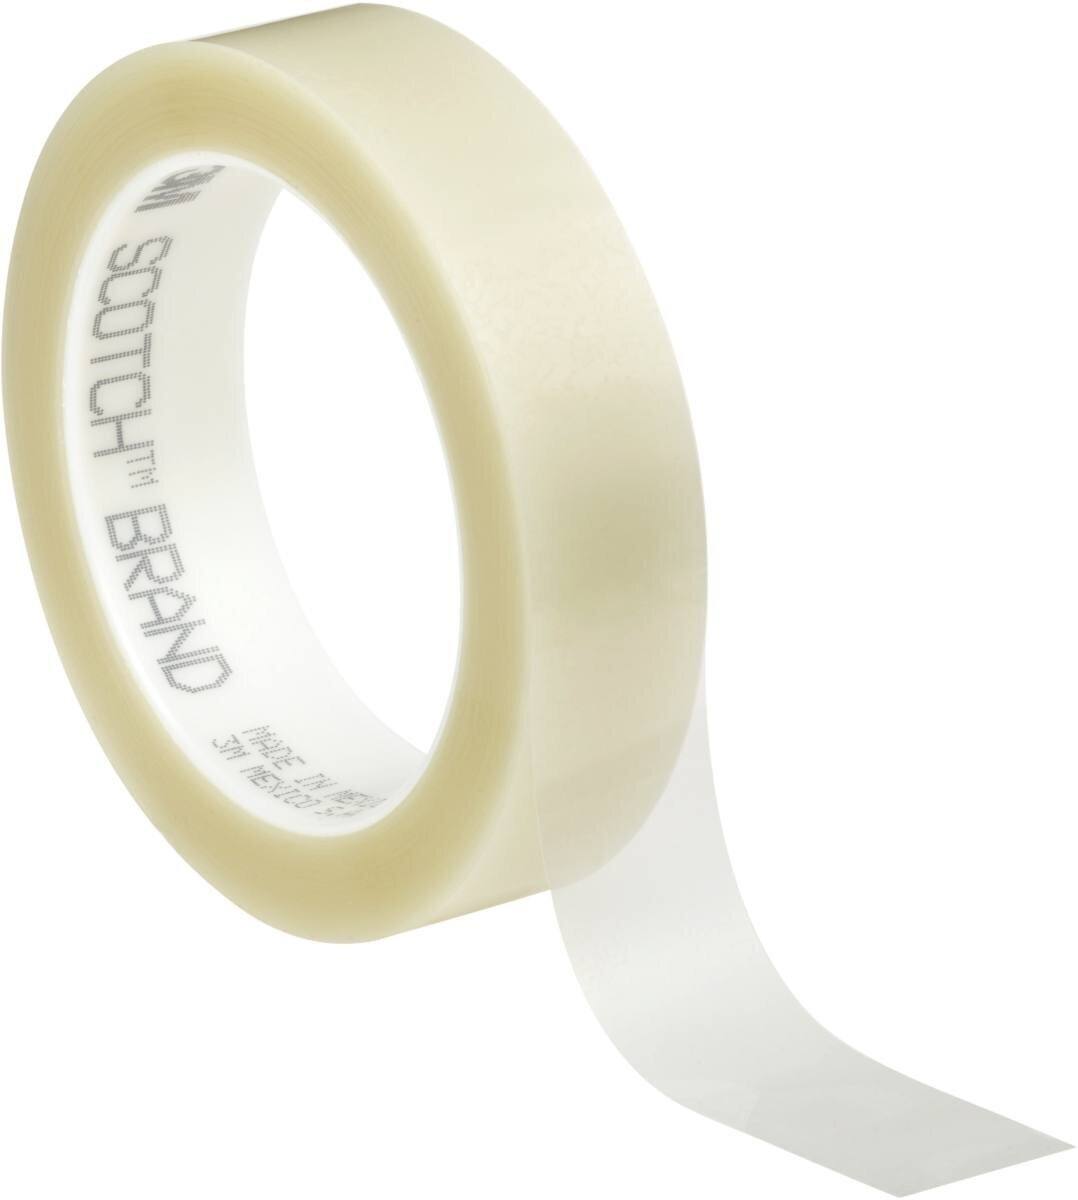 3M polyester adhesive tape 853, transparent, 25 mm x 66 m, 0.06 mm